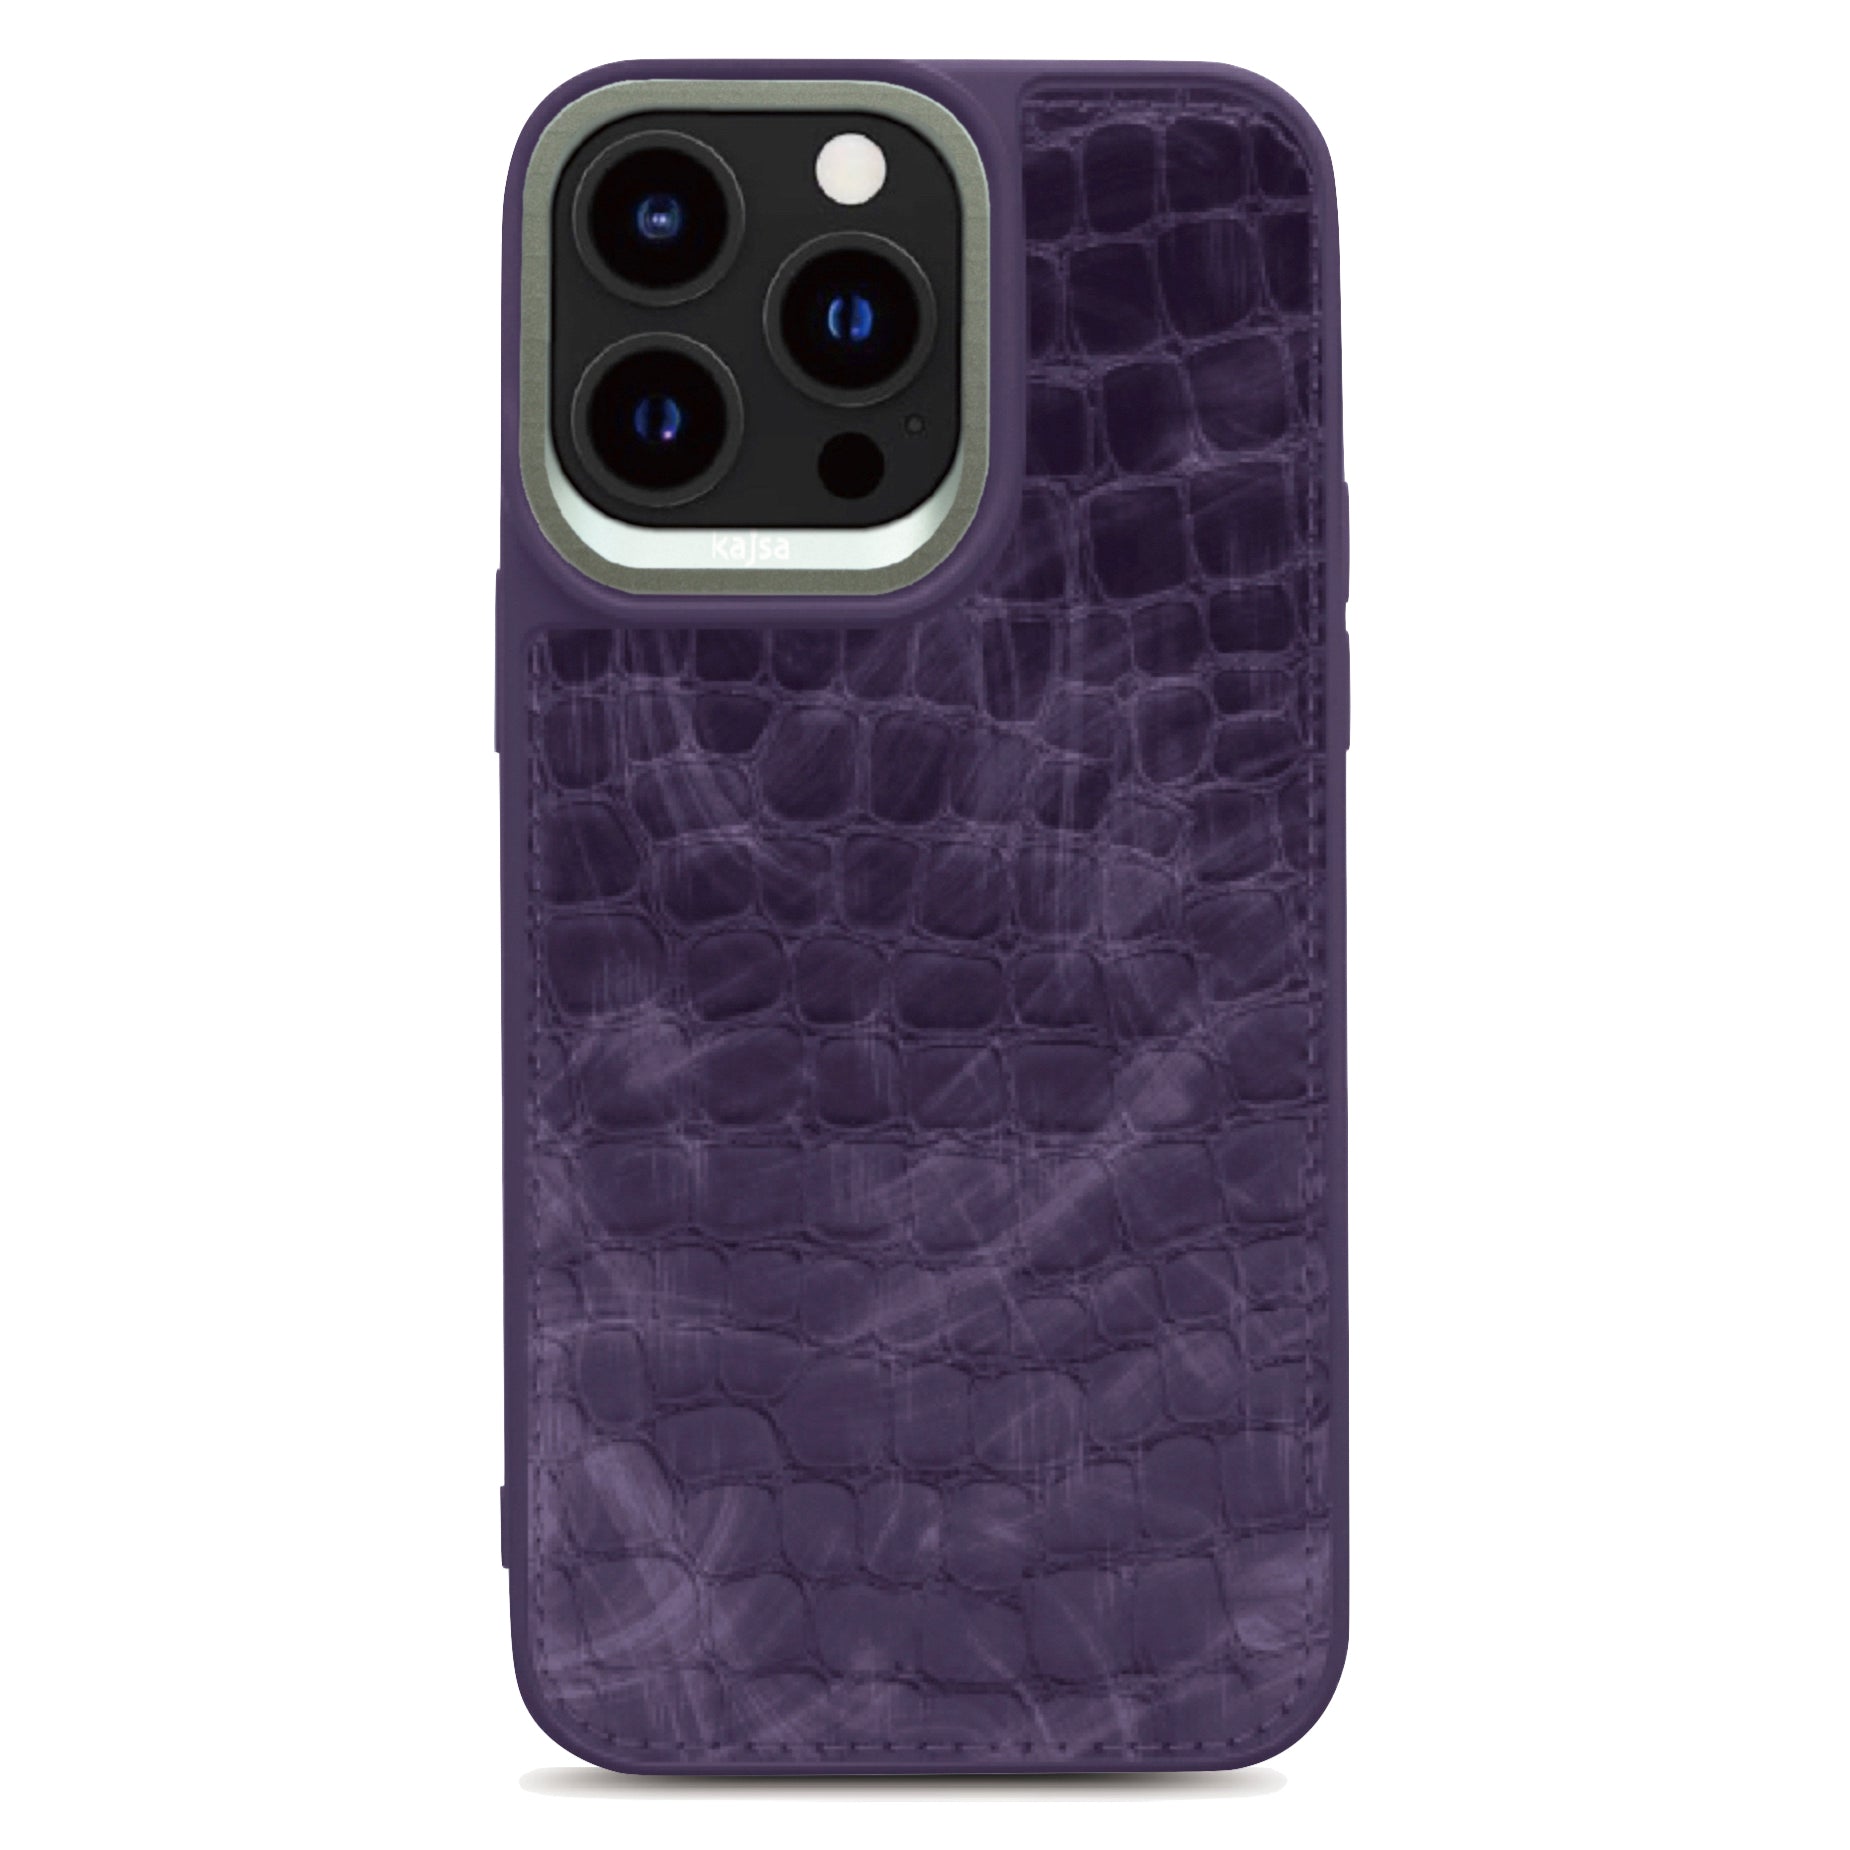 Glamorous Collection - Stone Pattern Back Case for iPhone 15